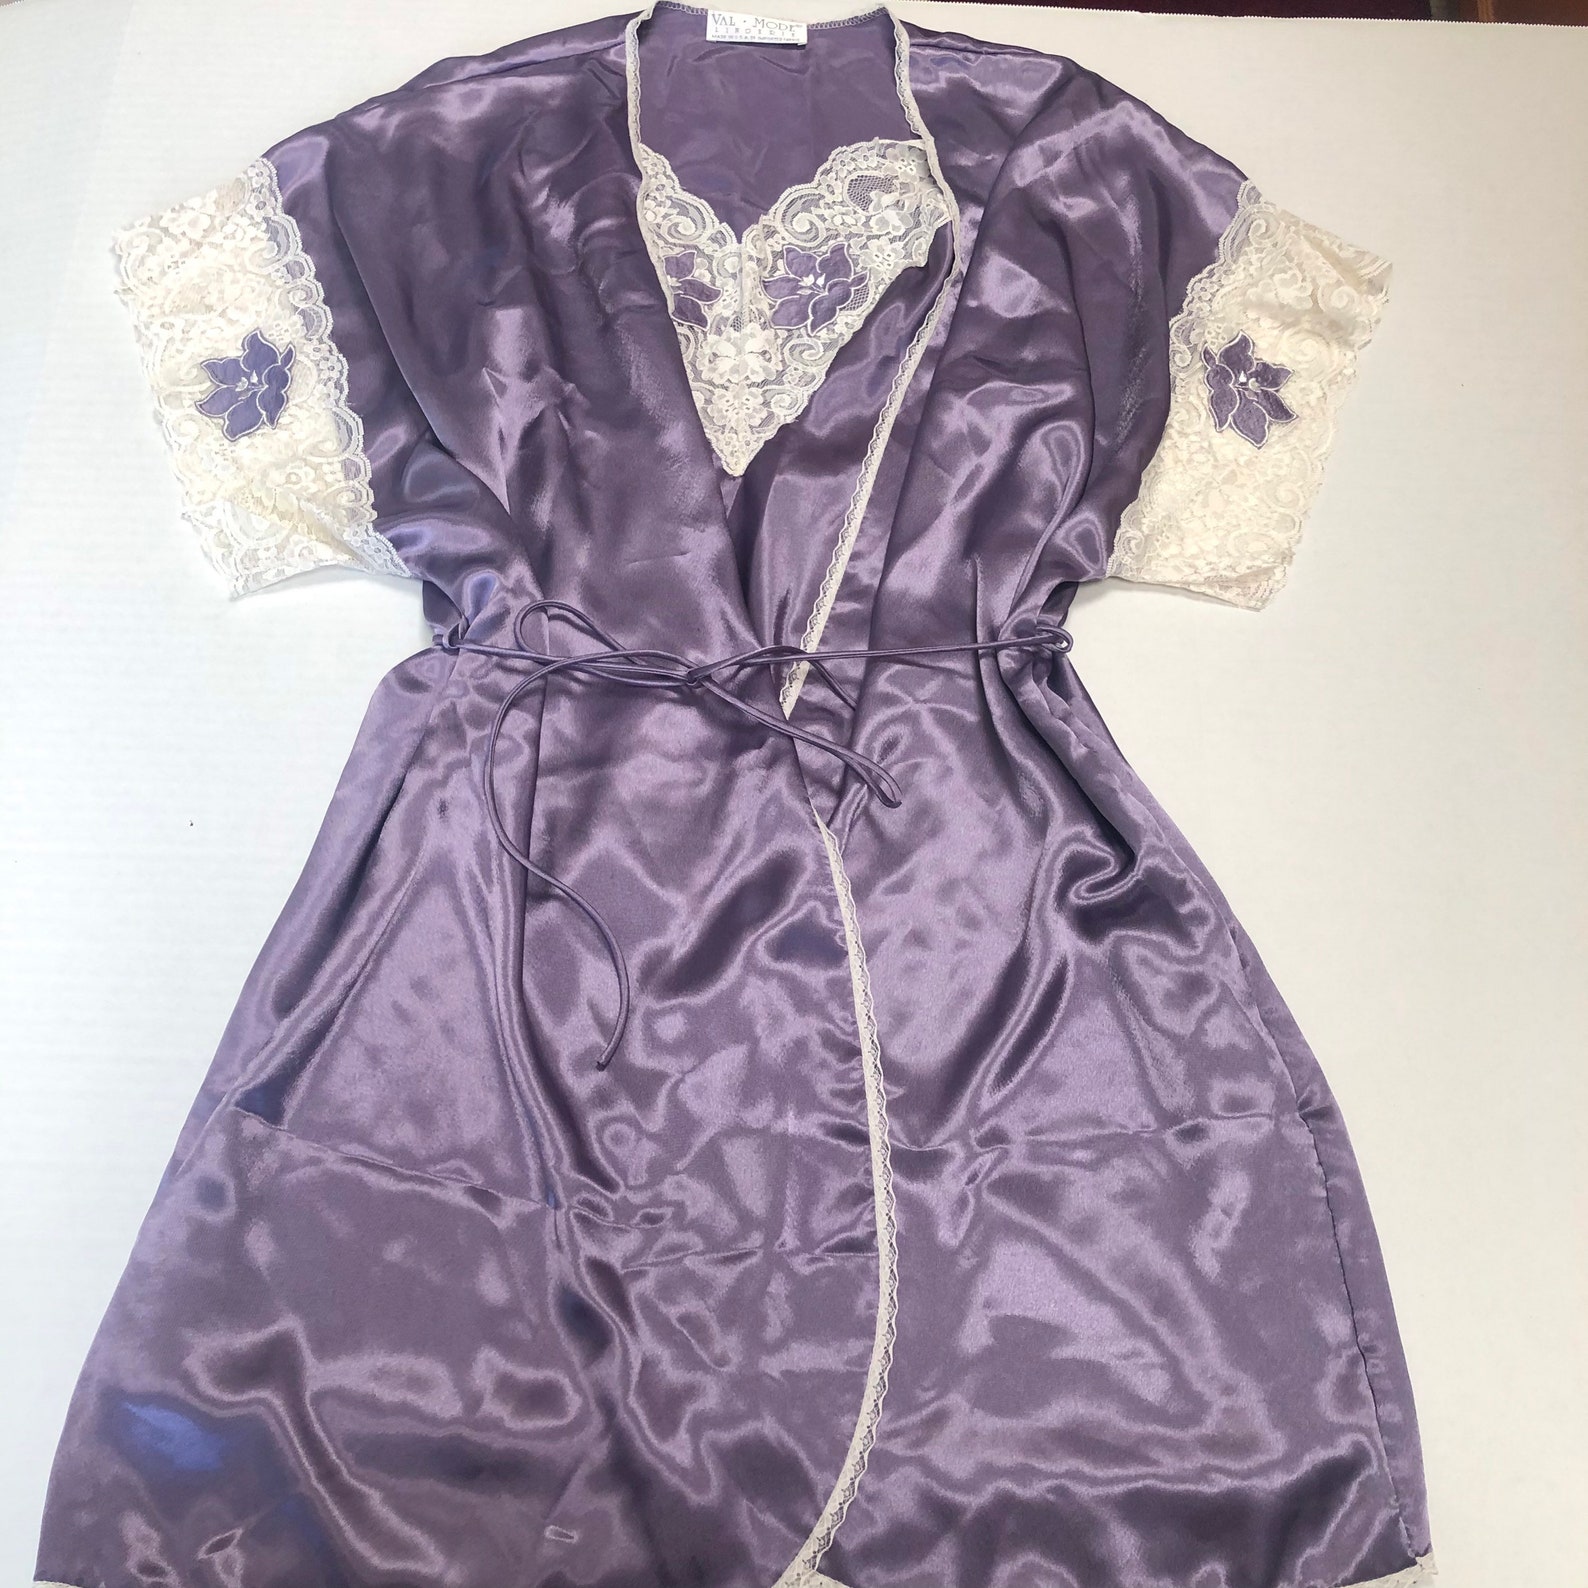 Purple Satin Lingerie Set With Slip Dress And Robe With Tie Etsy